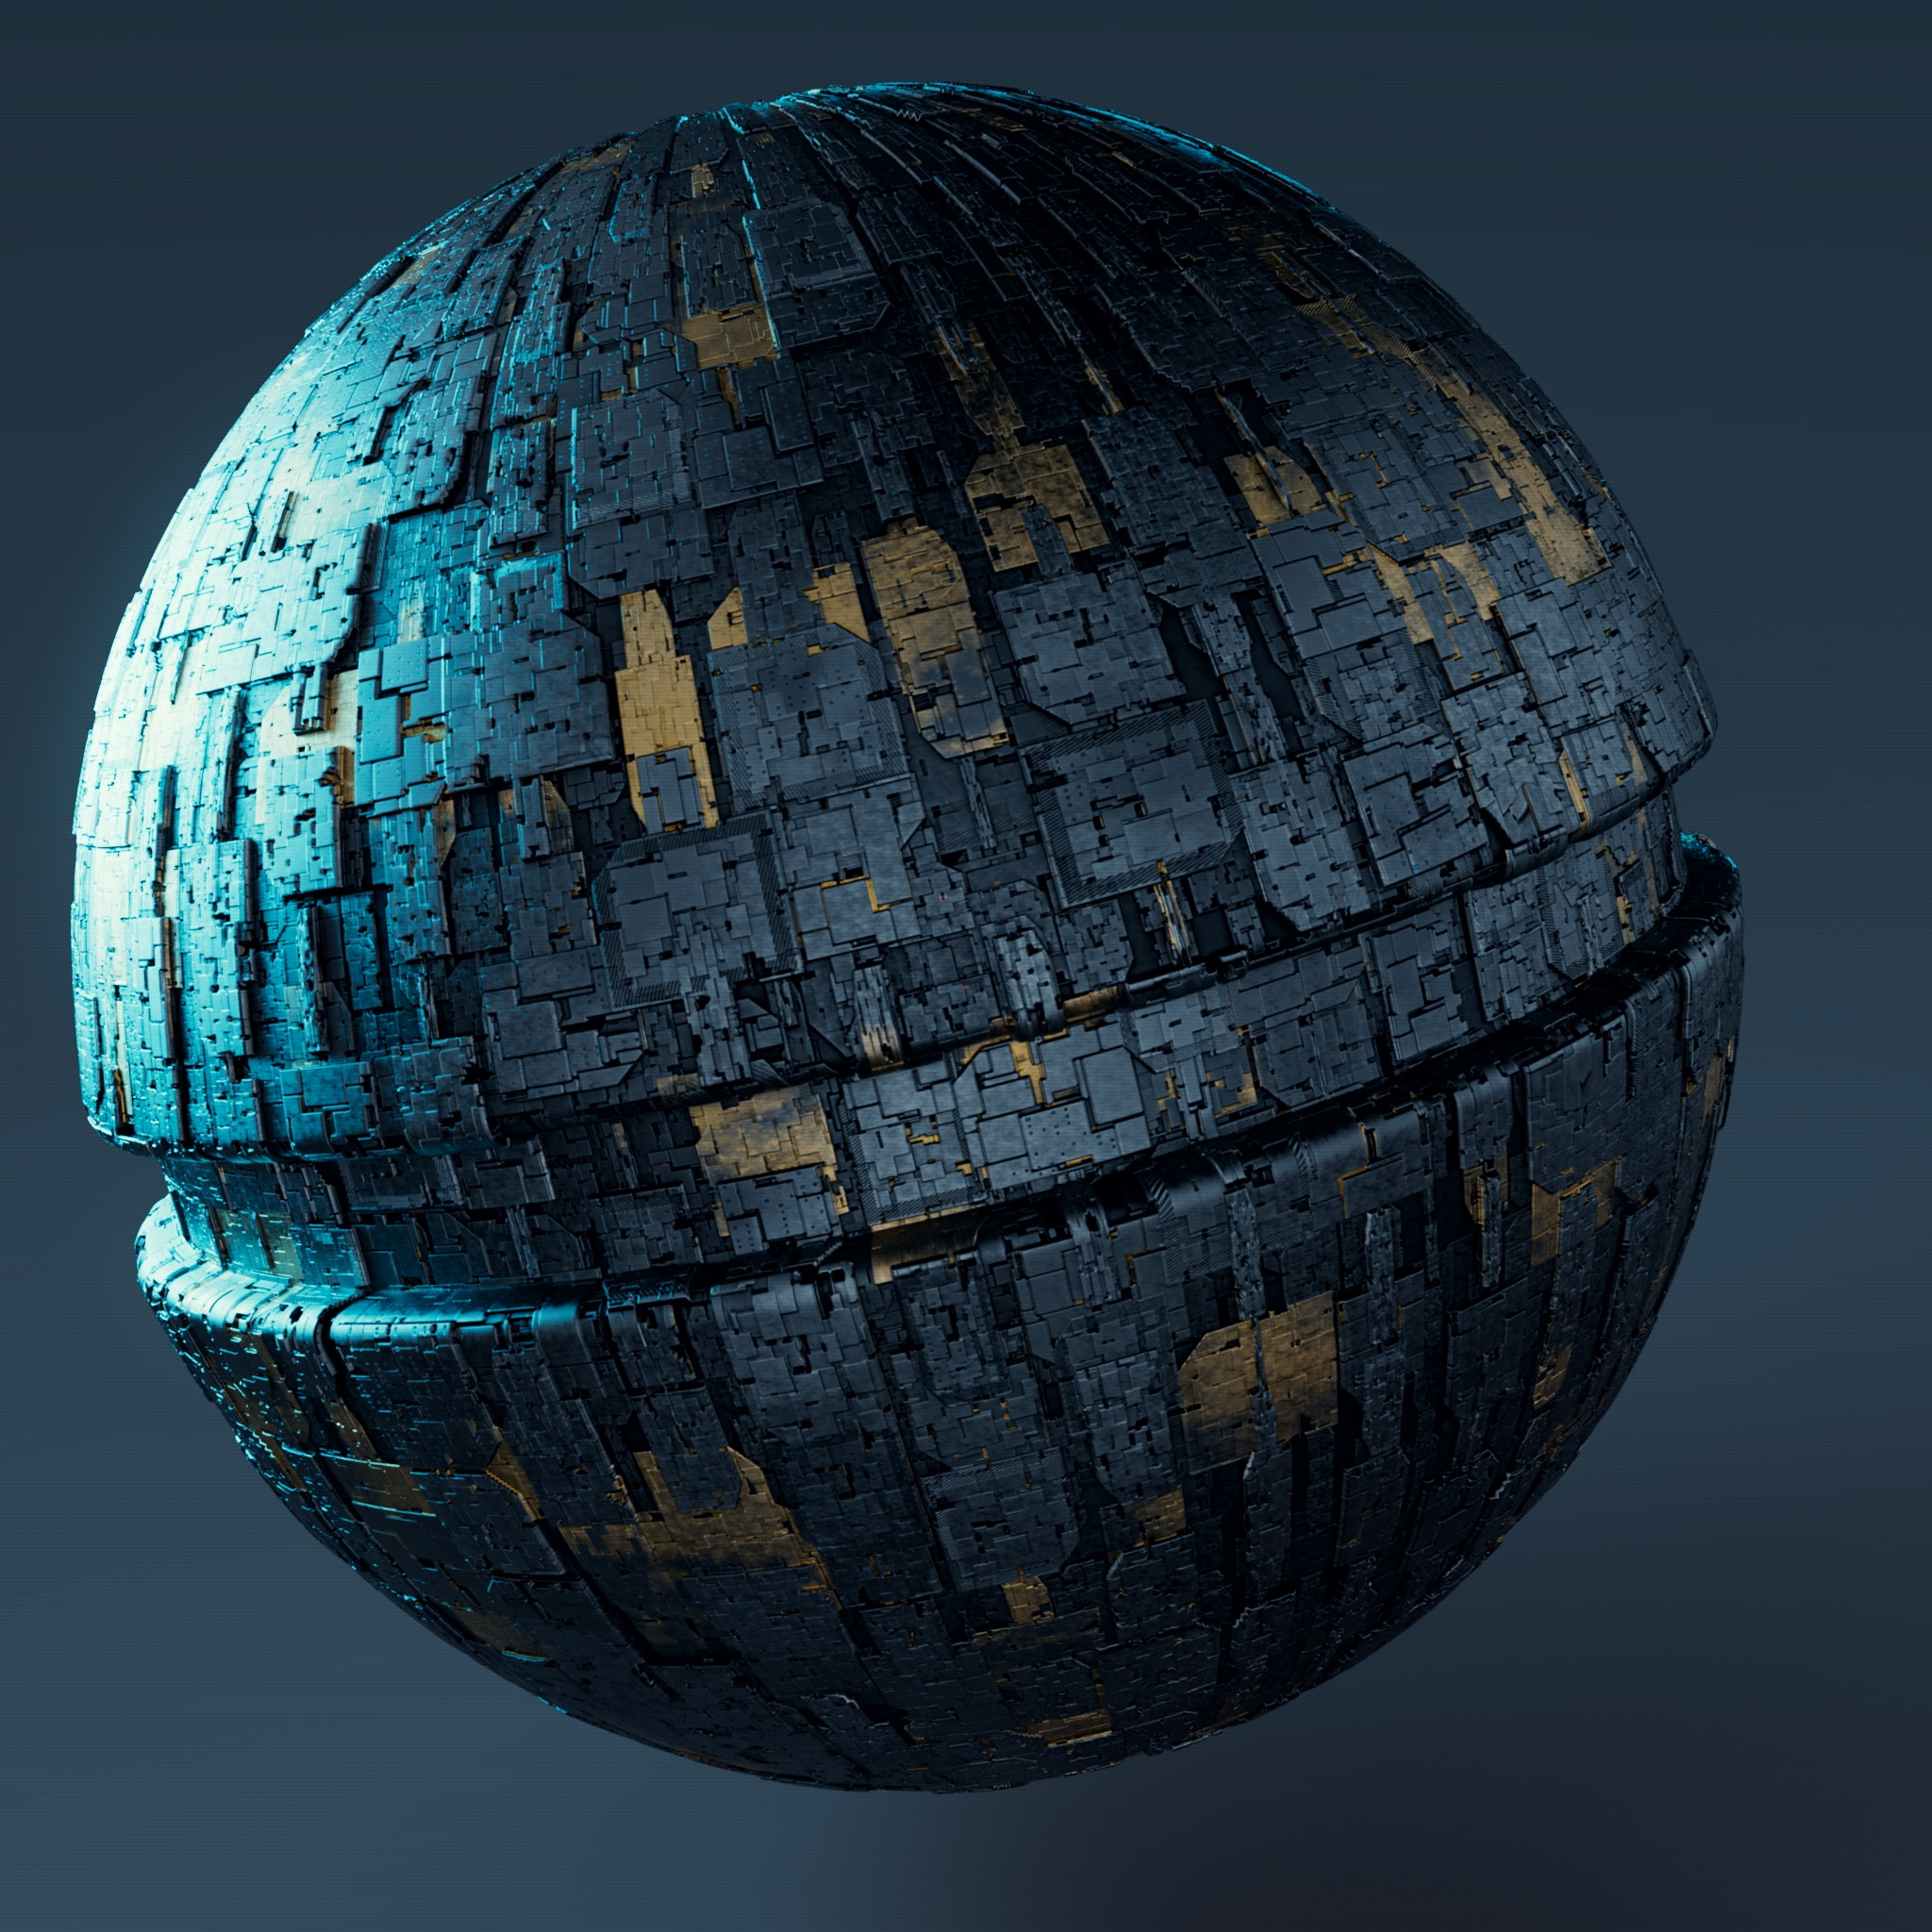 Rendered in RedShift over a simple base model 8k maps + 4x Tiling